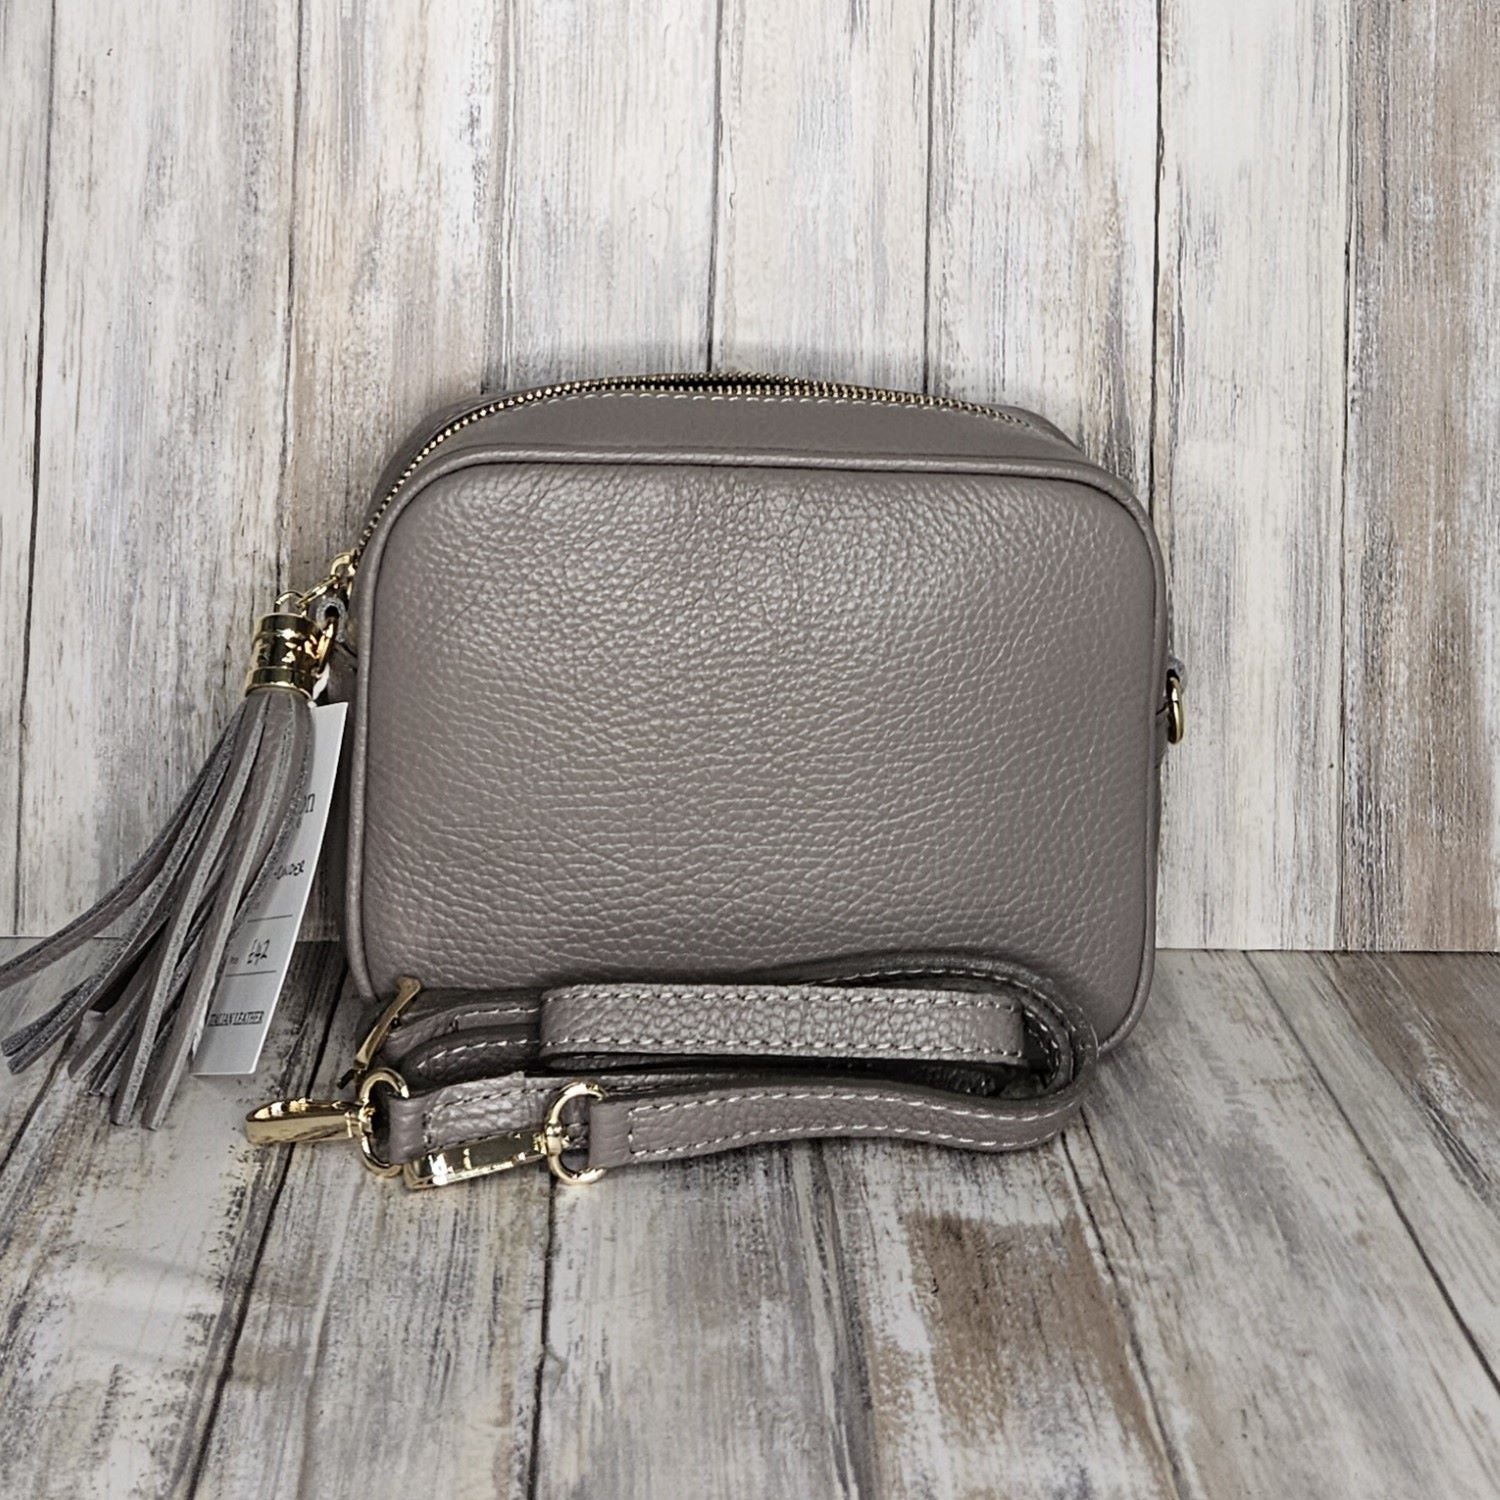 This classic Italian Leather Camera Bag is the ideal everyday accessory, featuring a sophisticated leather strap, or spice up your style with one of our canvas bag straps.   Fully lined   Internal Card Pocket   Gold Hardware  Detachable Long Strap   Tassel Key Ring   L21CM H14.50CM H7CM